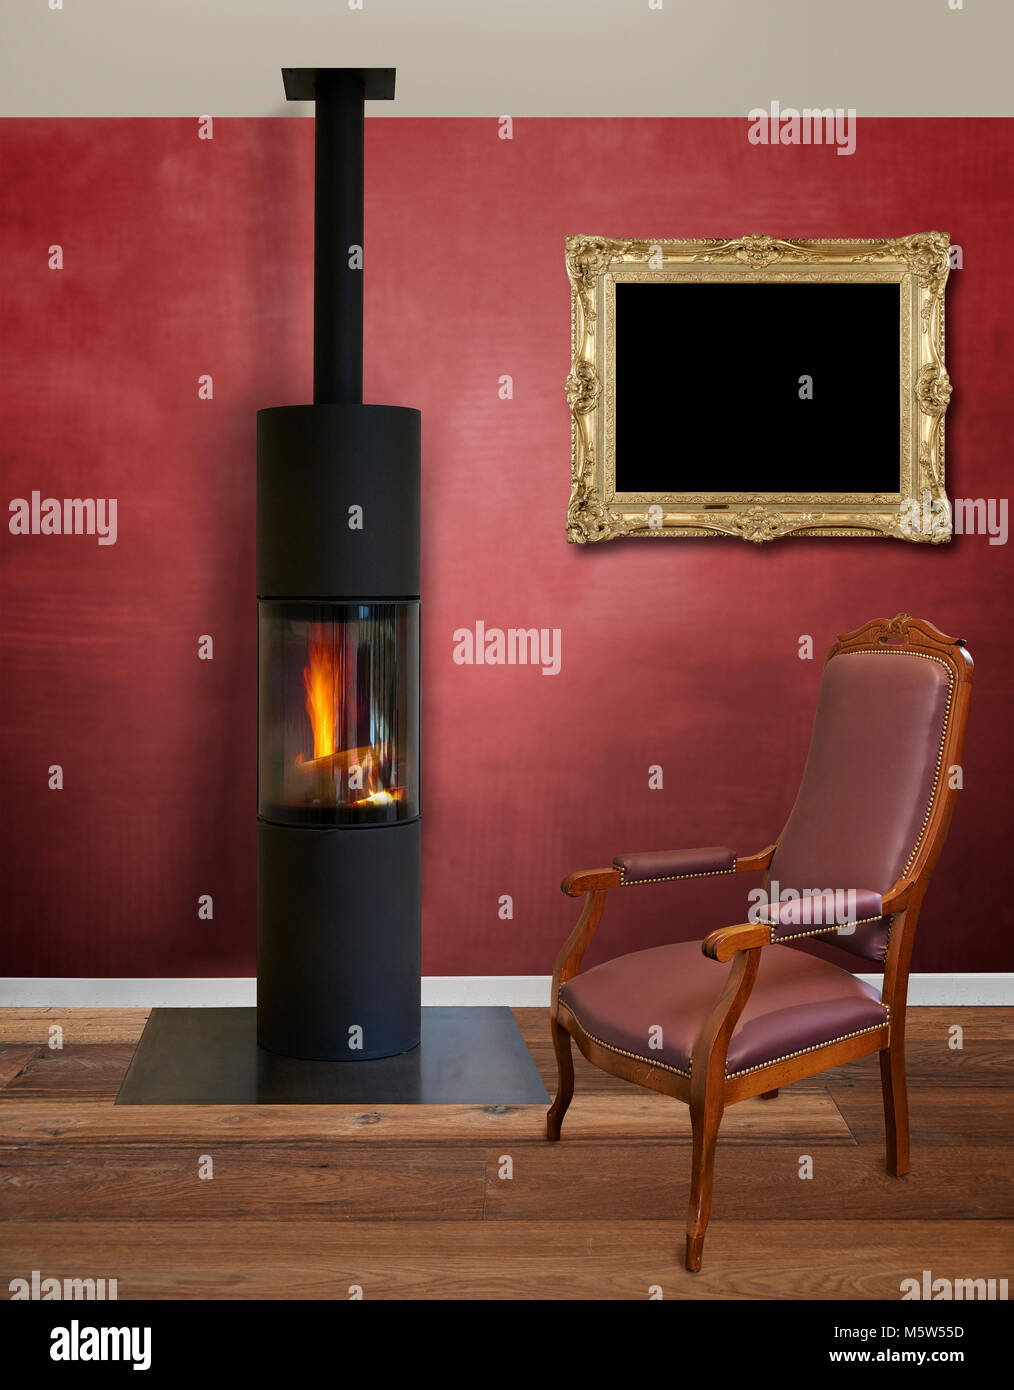 Modern interior with modern wood burner against textured red wall Stock Photo